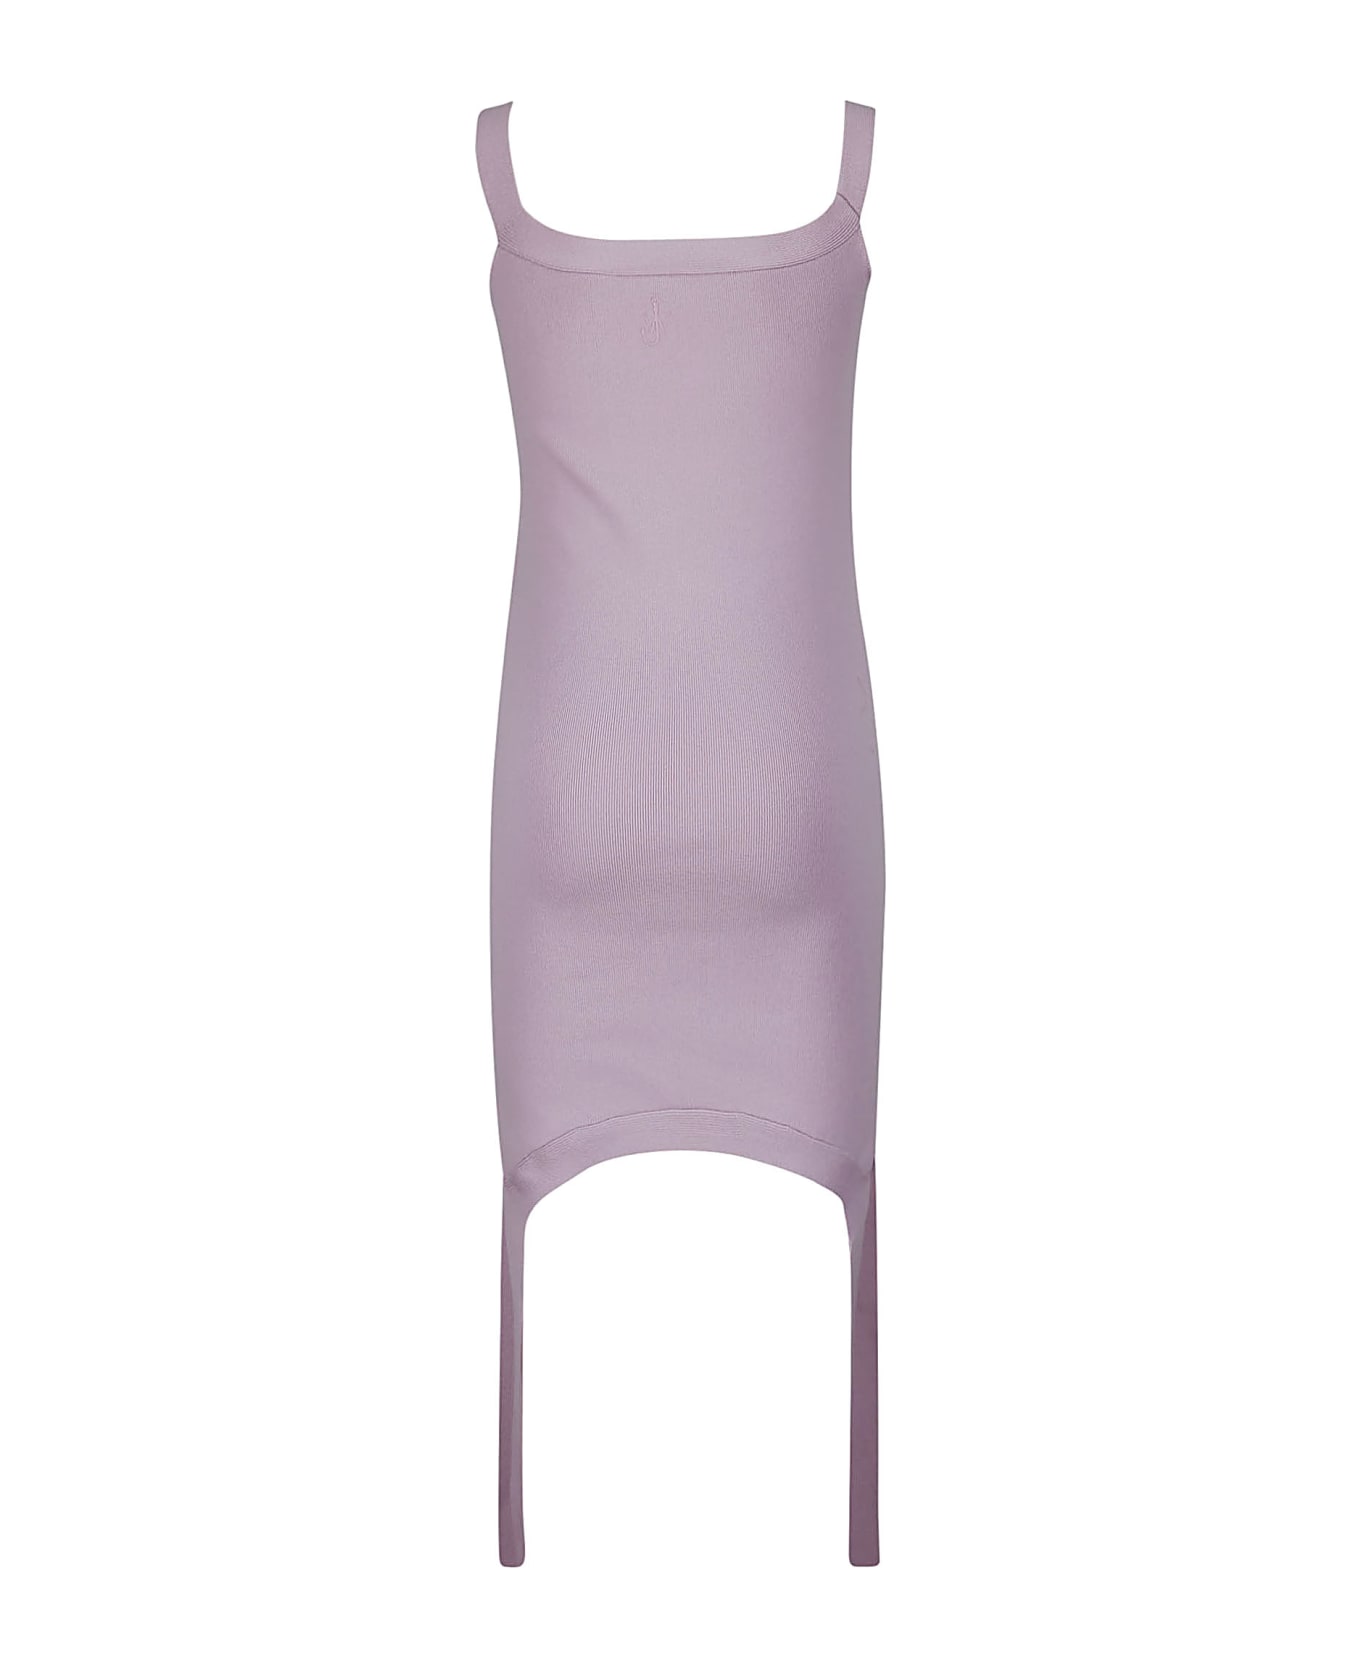 J.W. Anderson Deconstructed Dress - LILAC